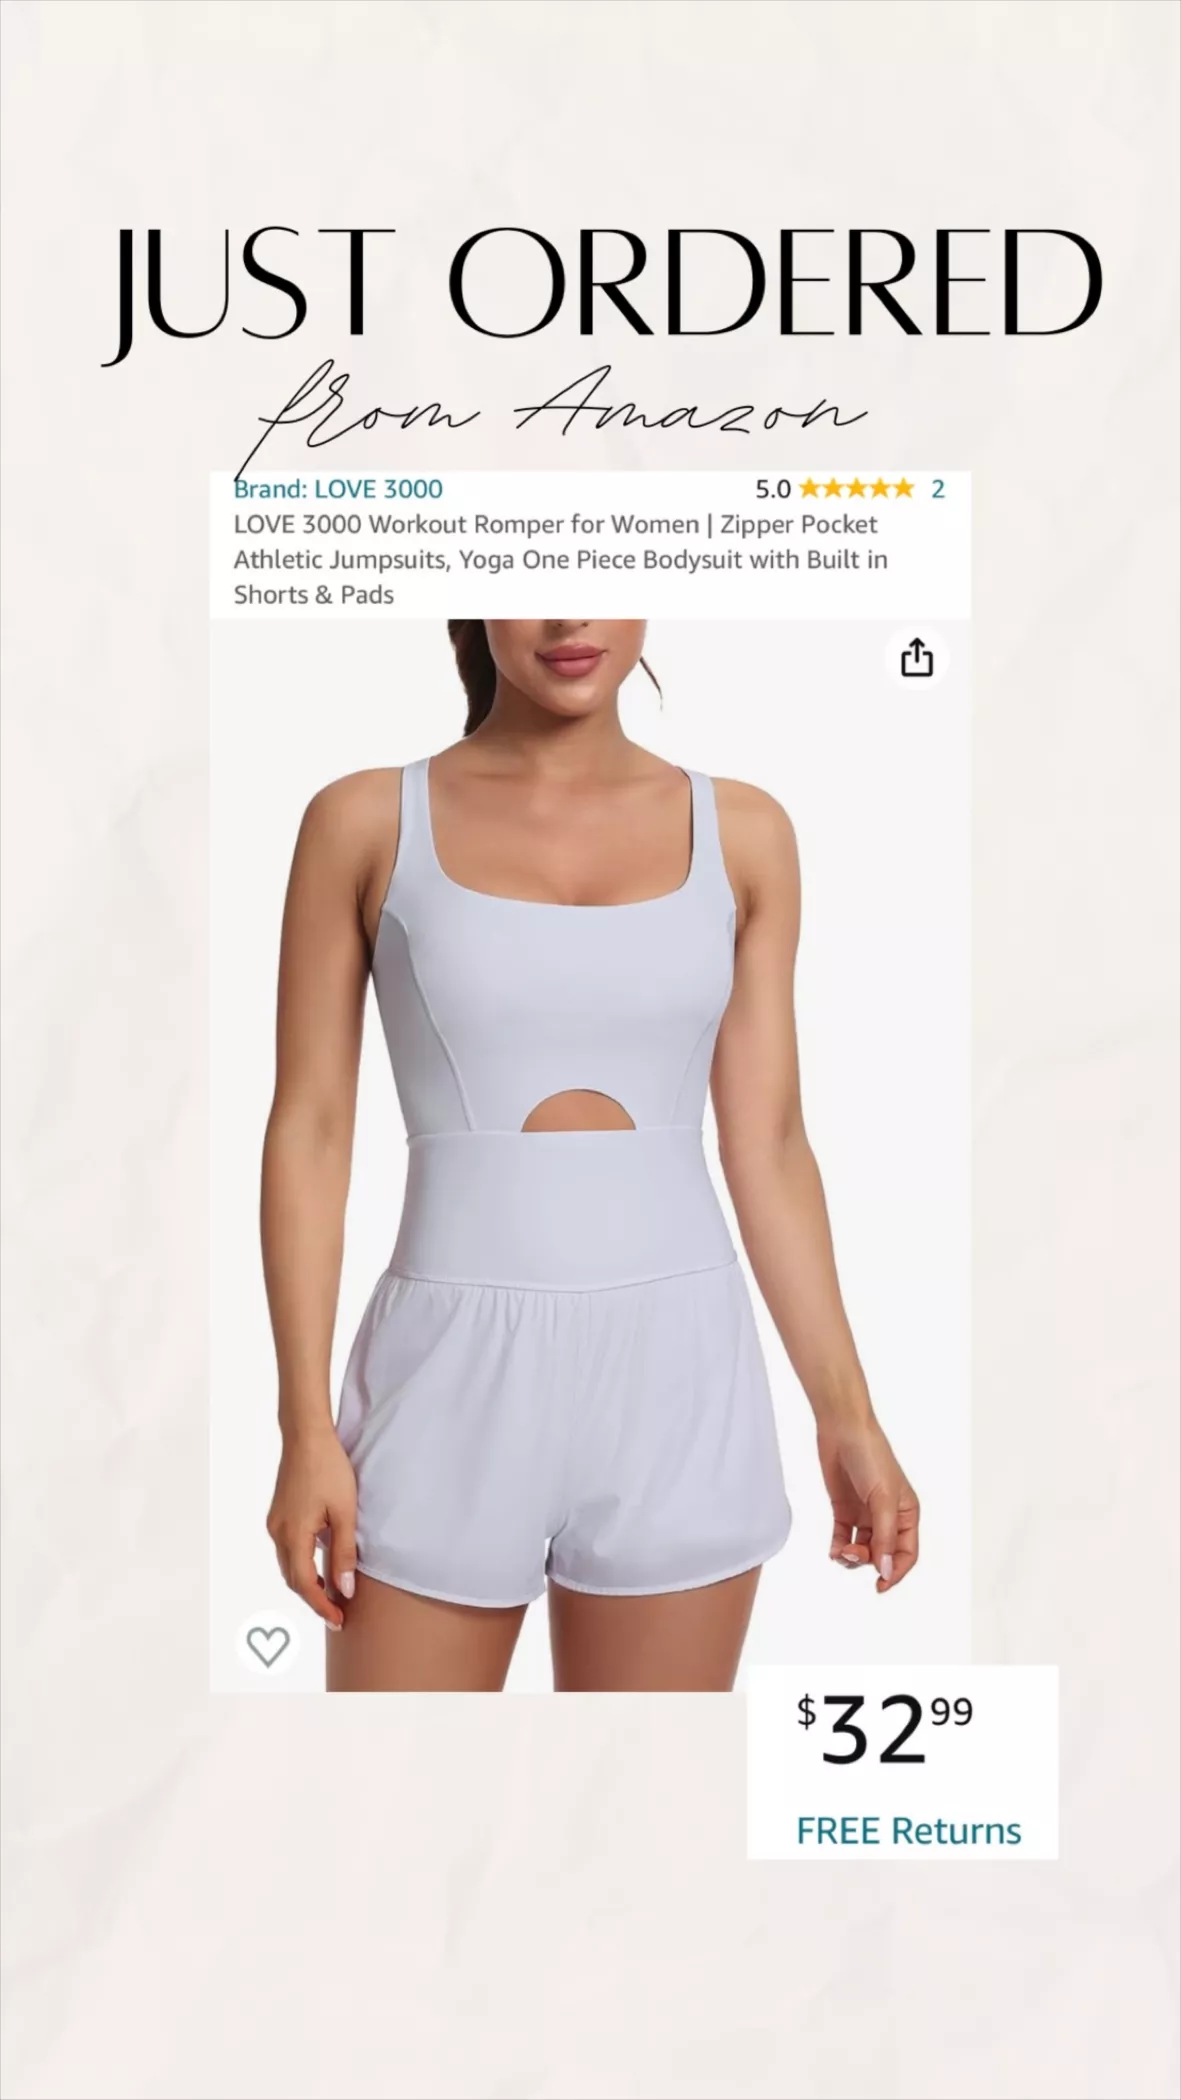 One-Piece Bodysuits, Workout Onesies and Jumpsuits, Free People